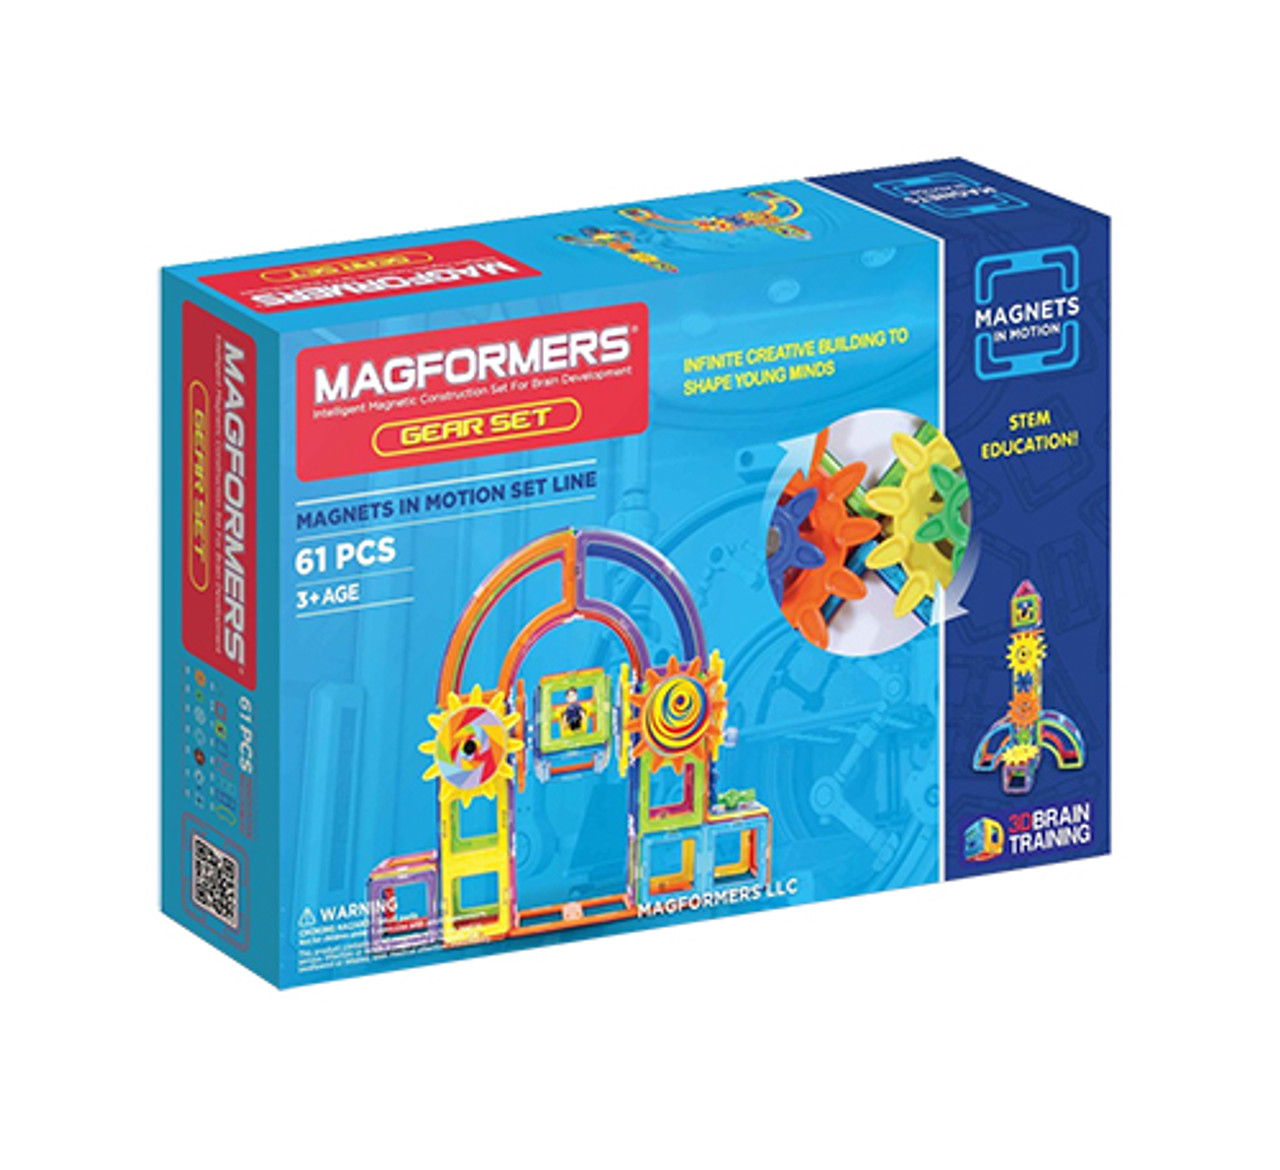 Magformers Magnets in Motion Technology Midwest Set, Construction - Magnetic 61-Piece Products